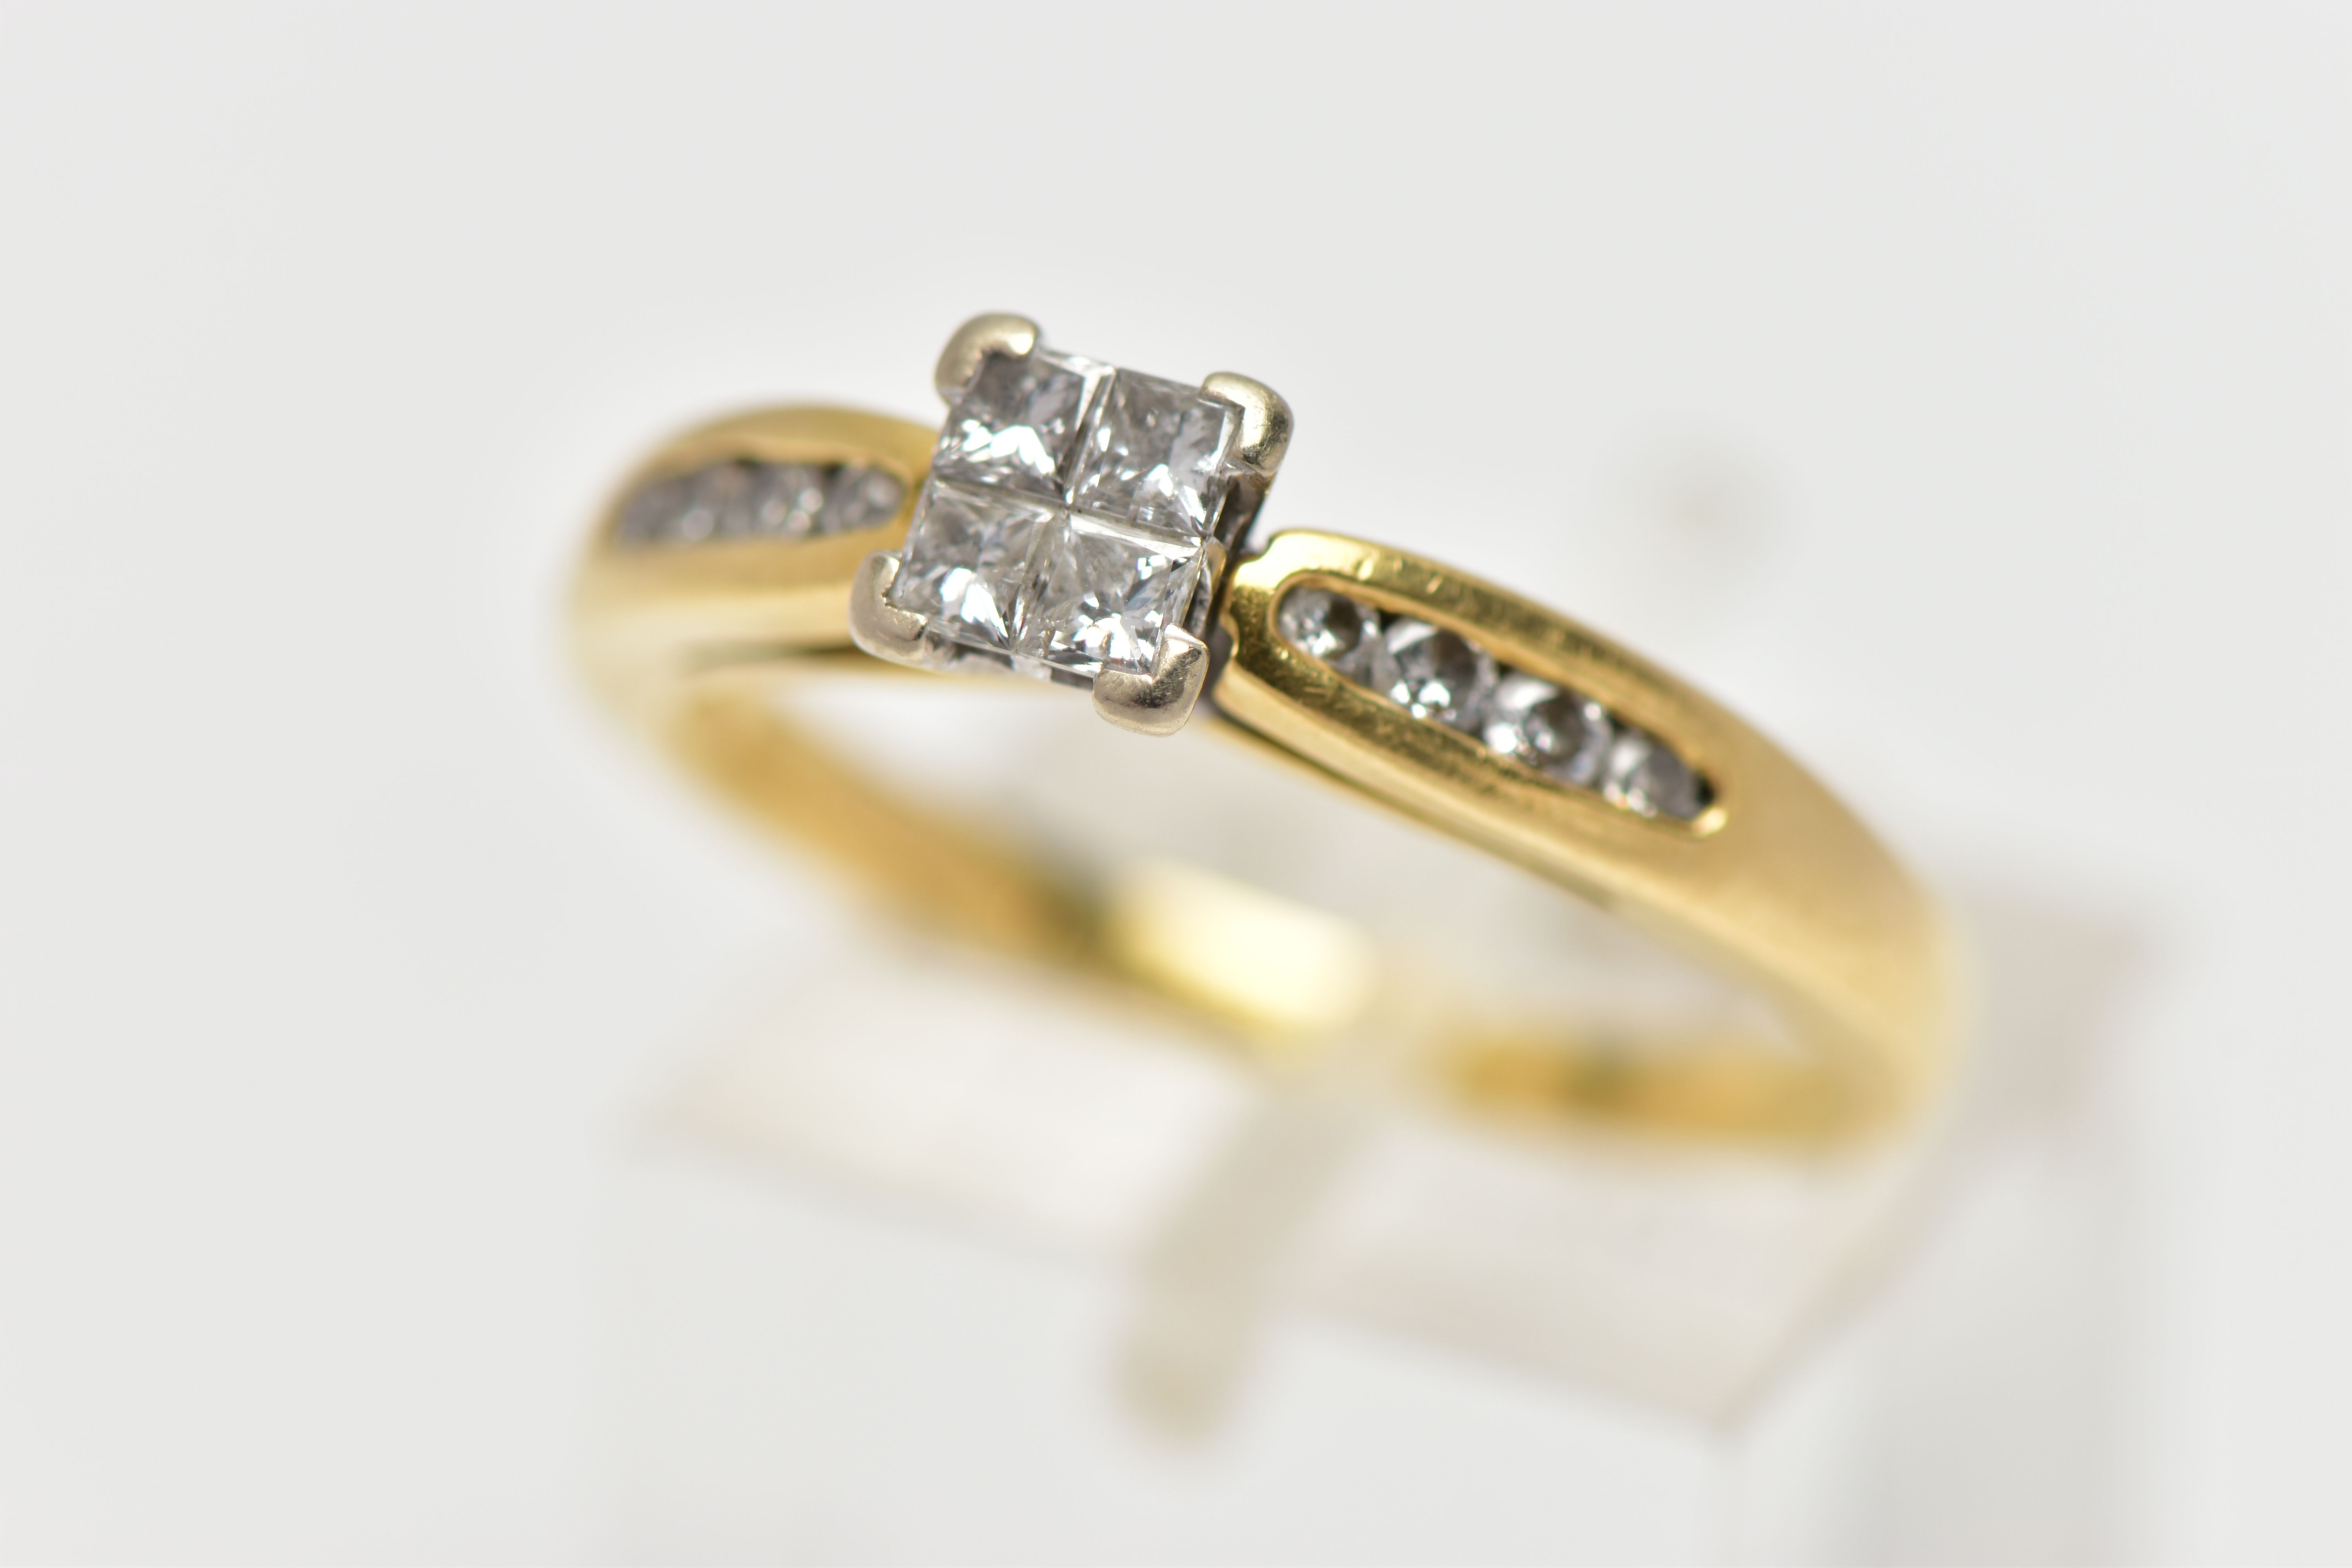 AN 18CT YELLOW GOLD DIAMOND RING, set with a square shape panel of four princess cut diamonds, to